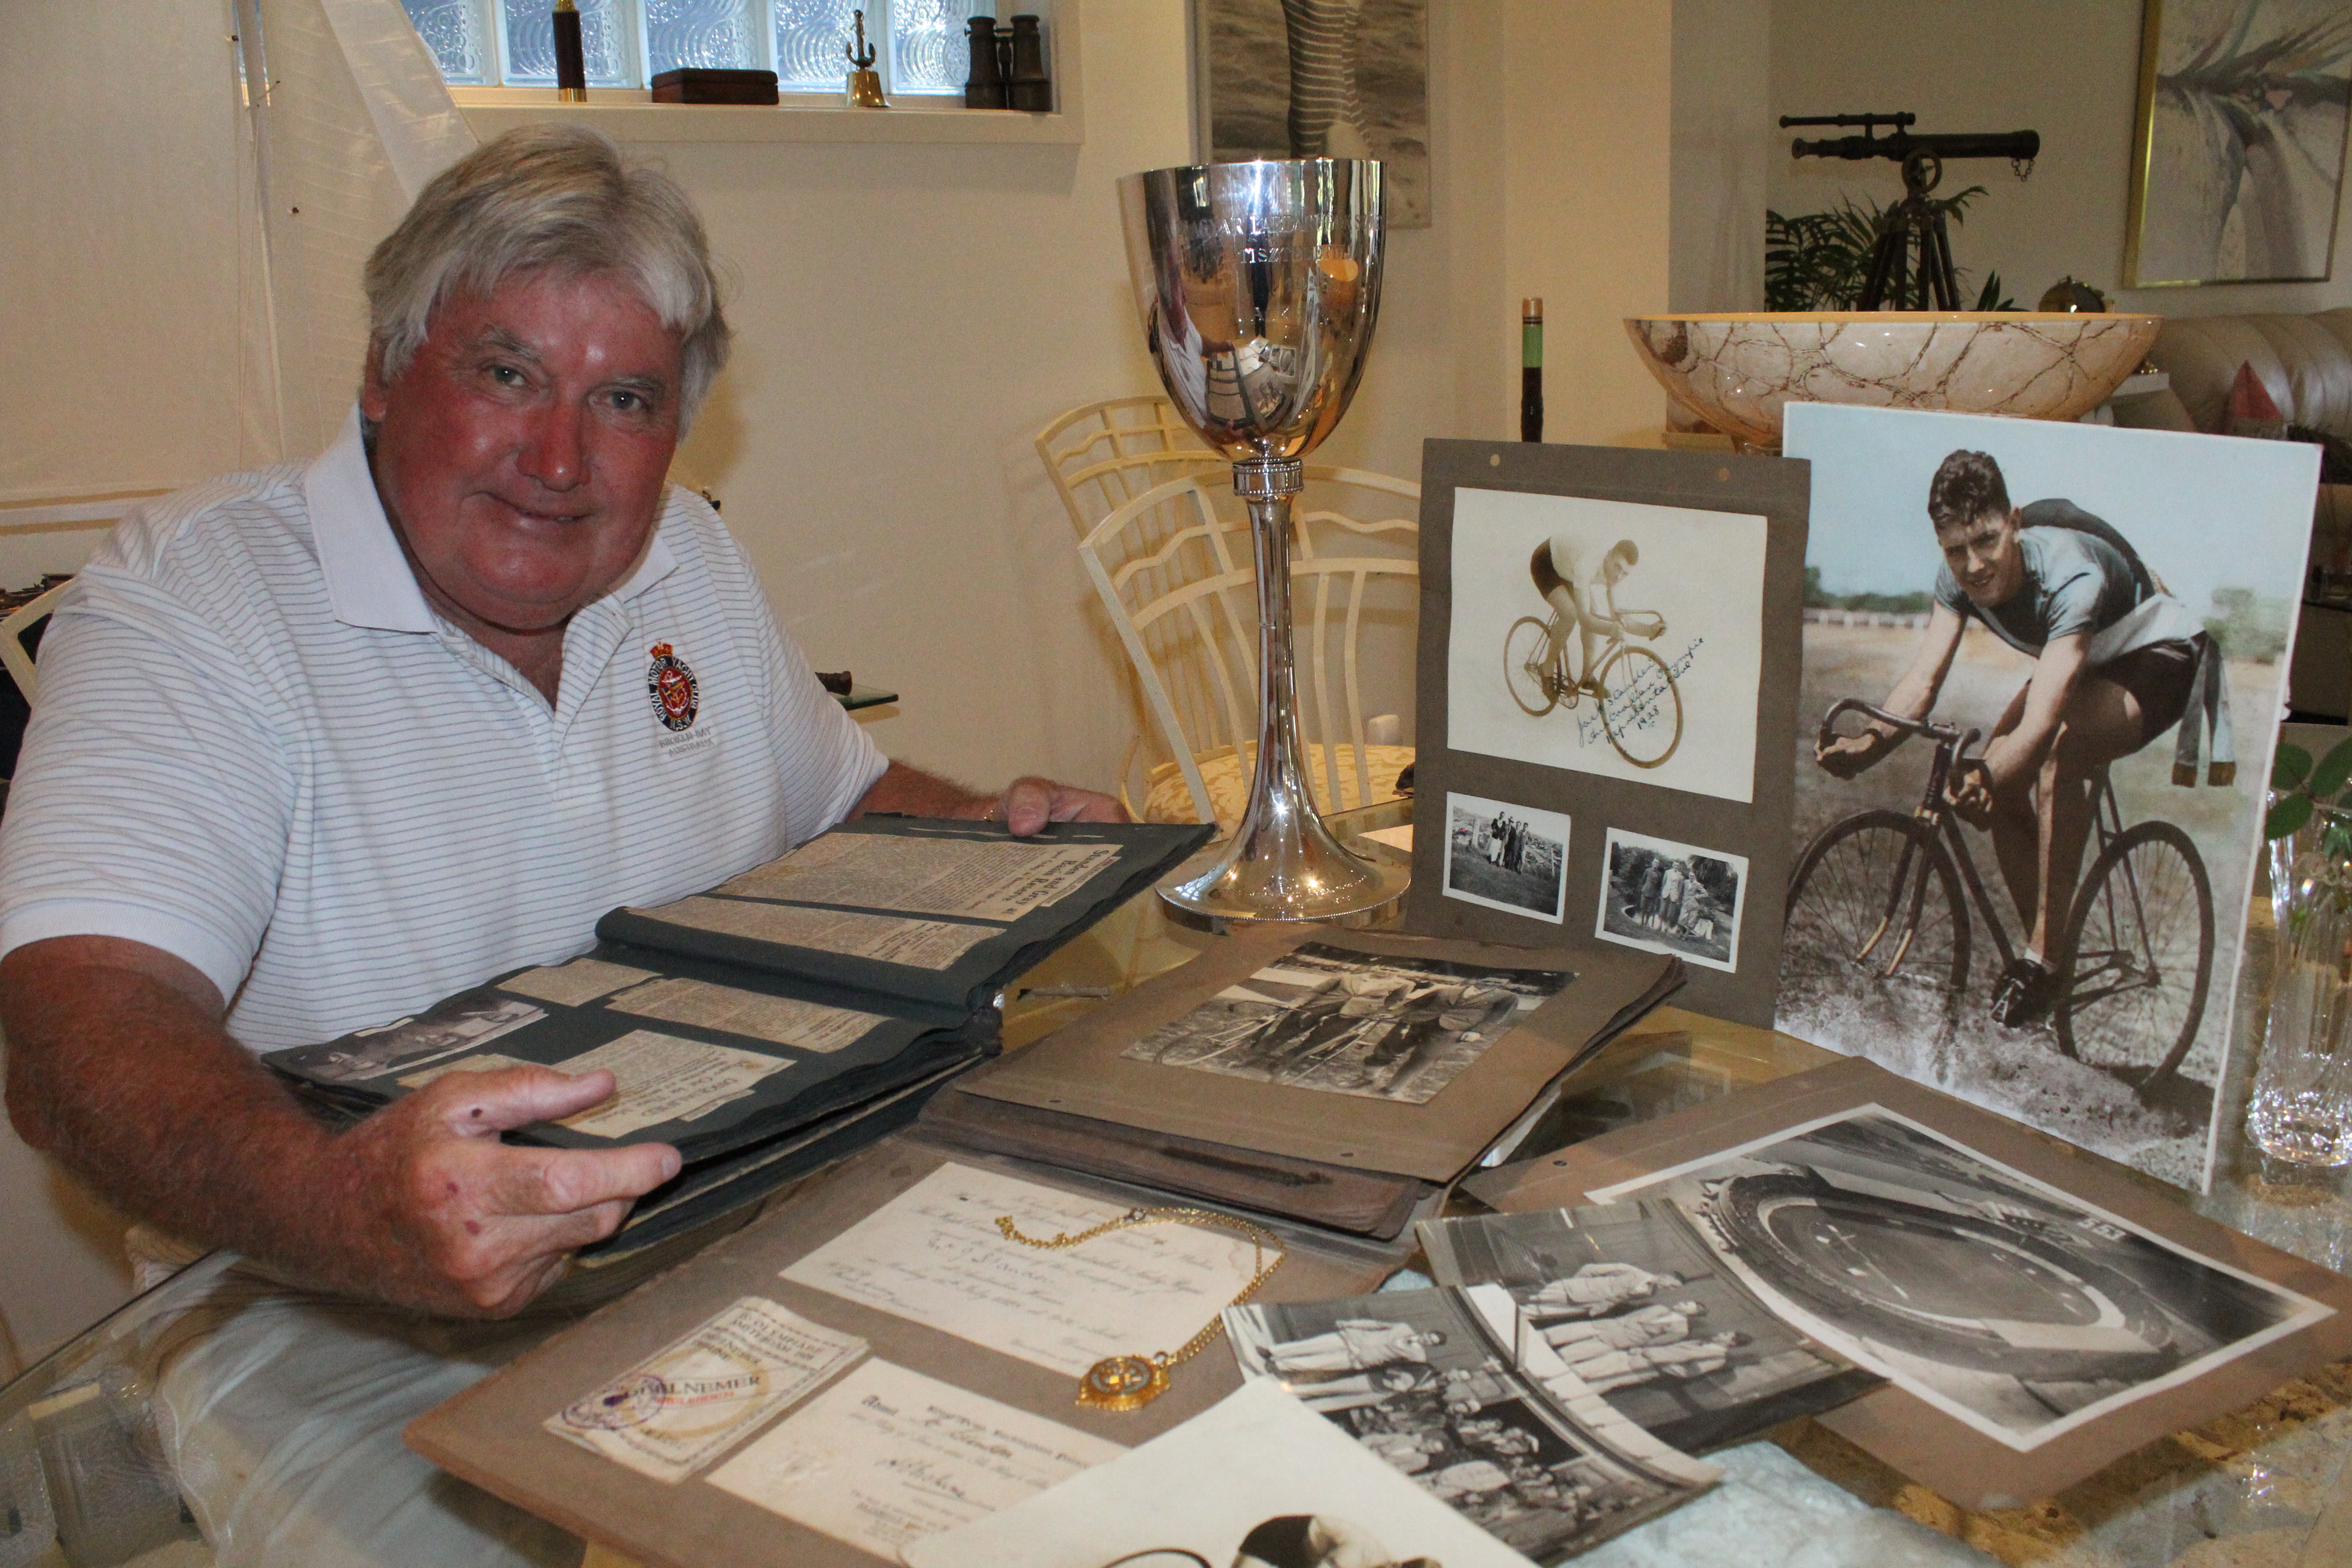 Graham Standen with his Dad Jack Standen’s memorabilia that proves Dreams Do Come True. Photo by Jewell Drury